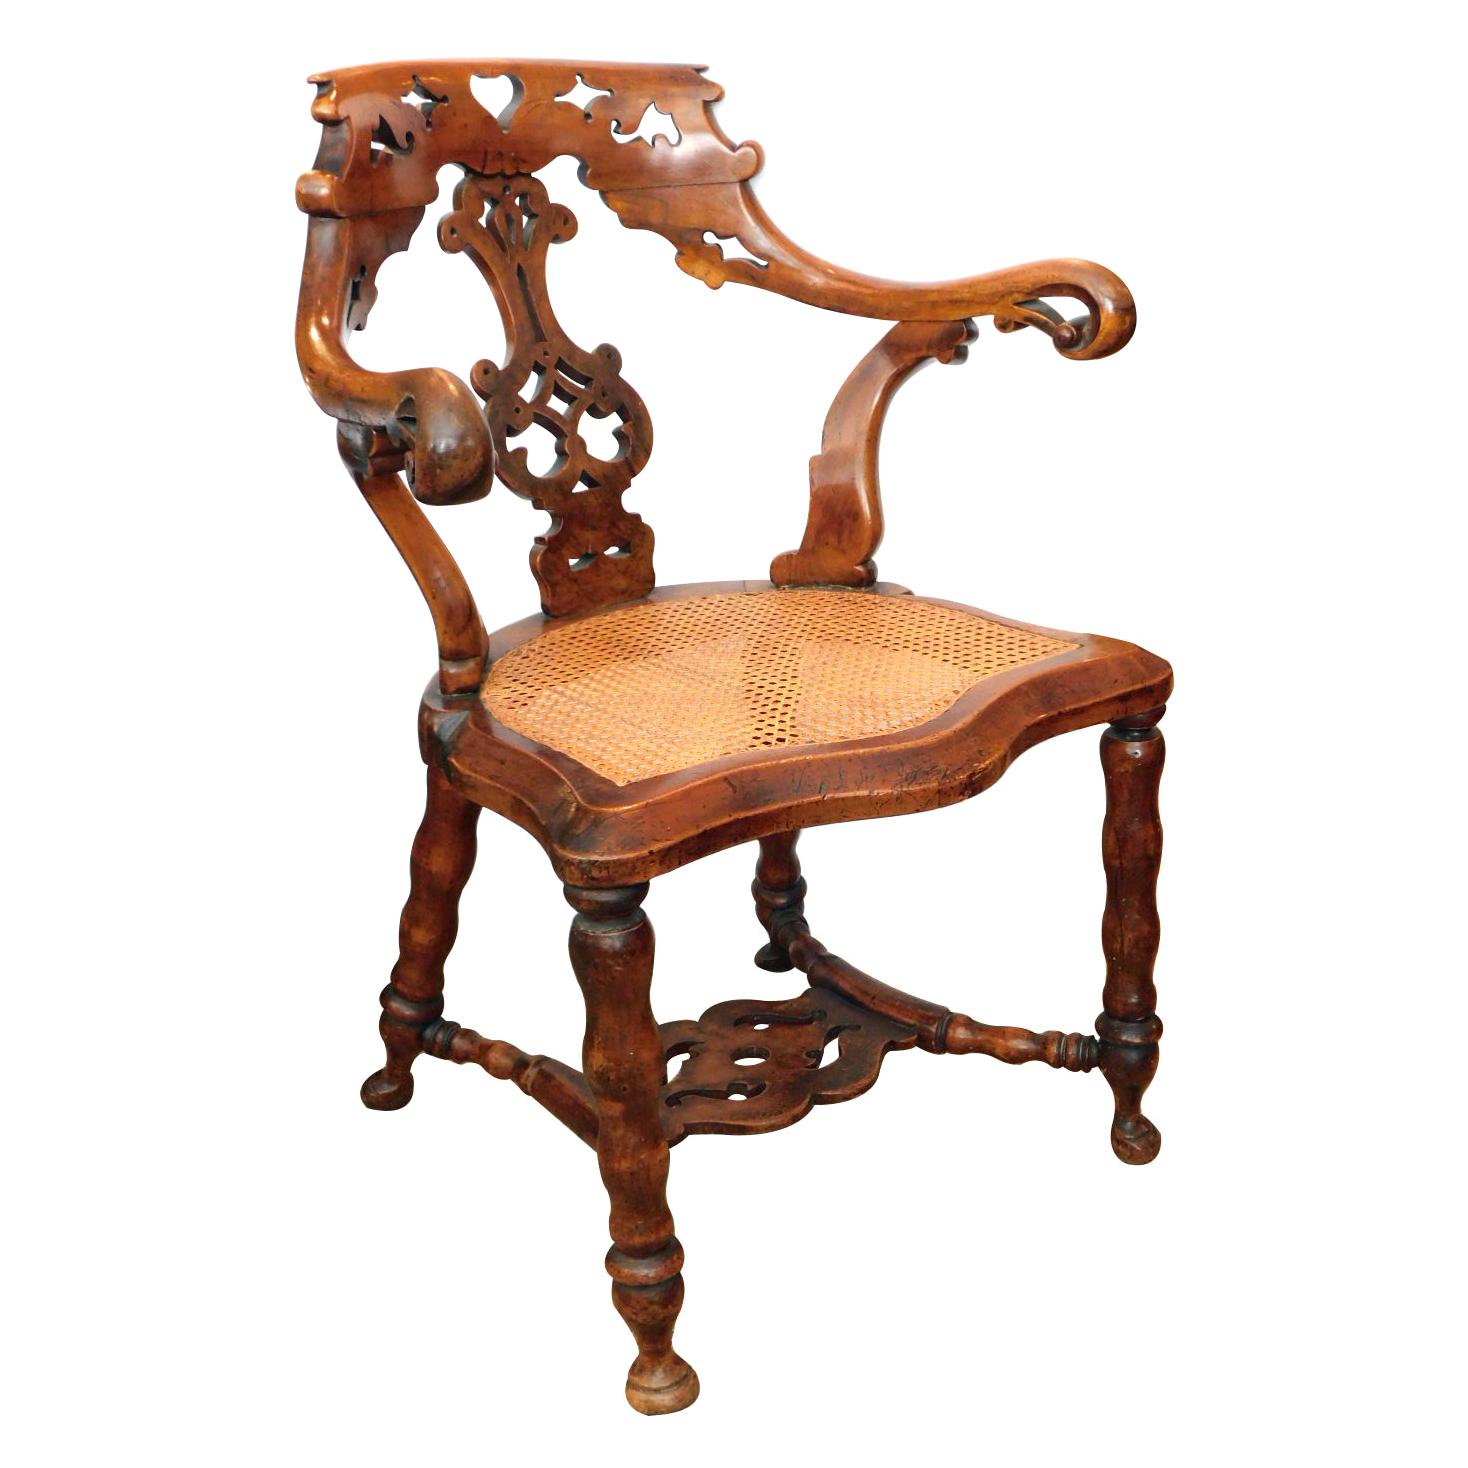 A Shapely English Yew Wood Captain's Chair